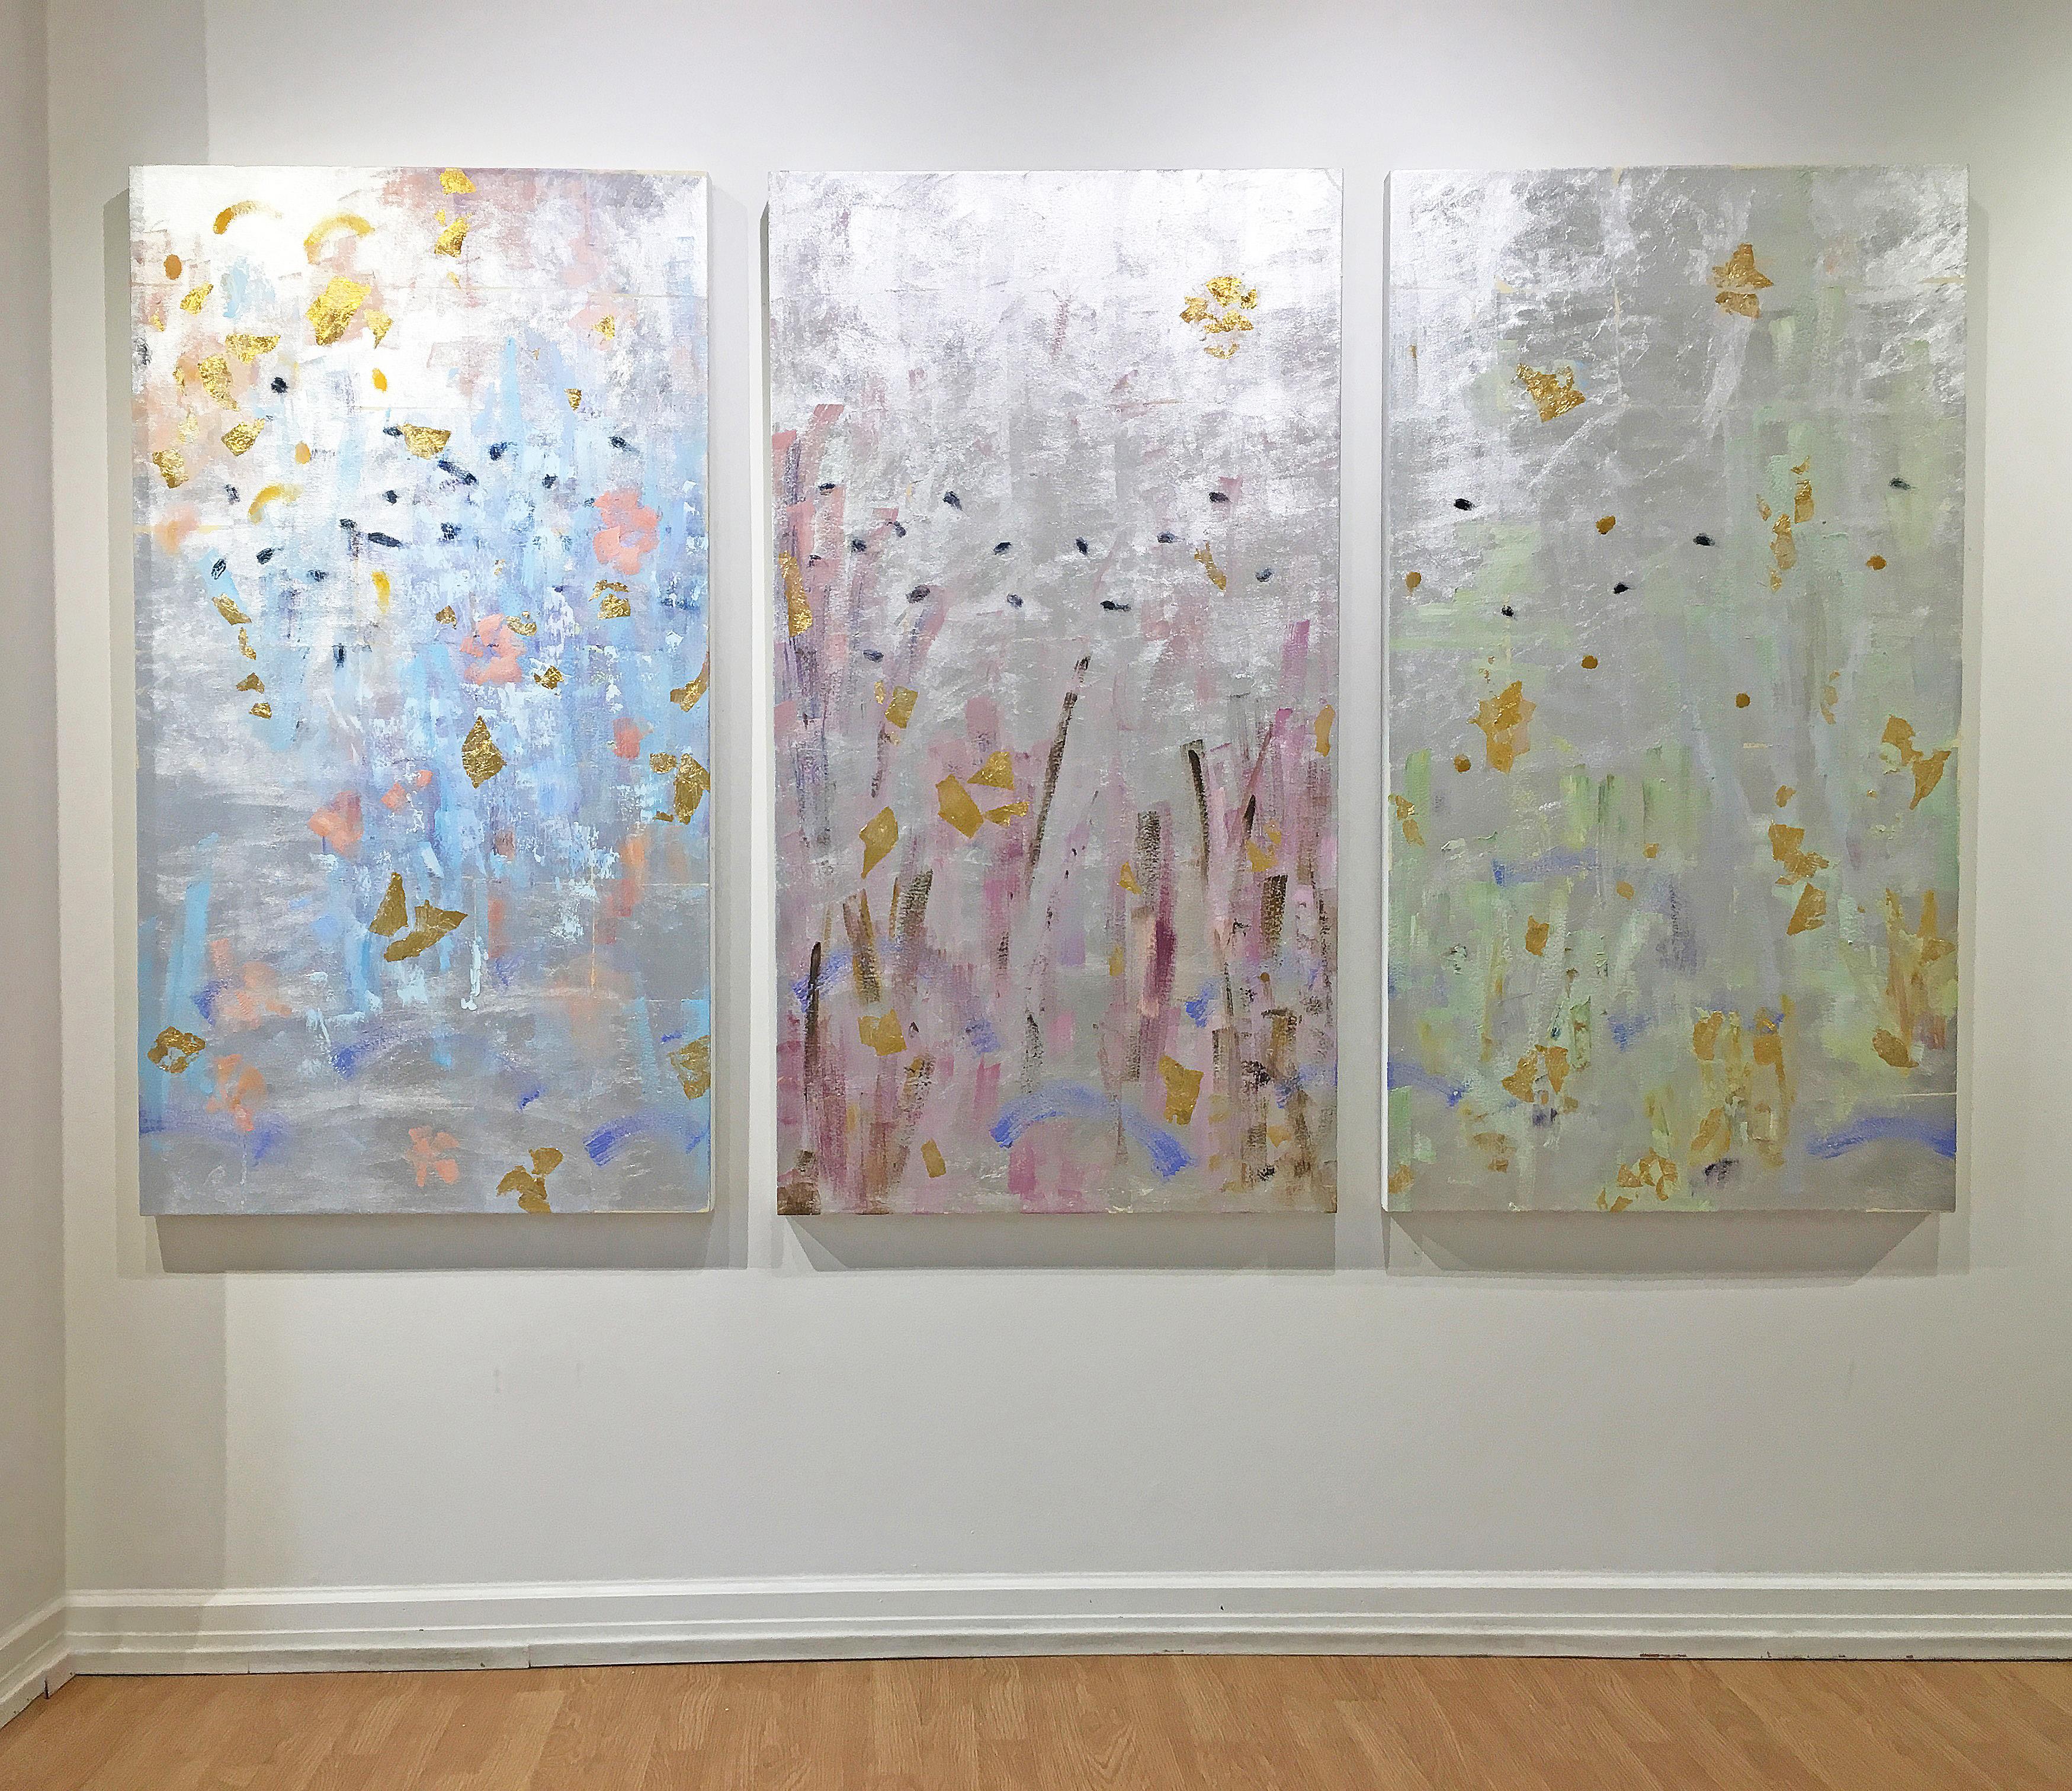 'Synergy I, II, & III' 2016 by Michelle Sakhai. Oil and metal leaf on canvas (triptych), 55 x 90 in. A dramatic dimensional, abstract painting with rich, fine materials. This triptych features a reflective silver leaf background, textured paint, and